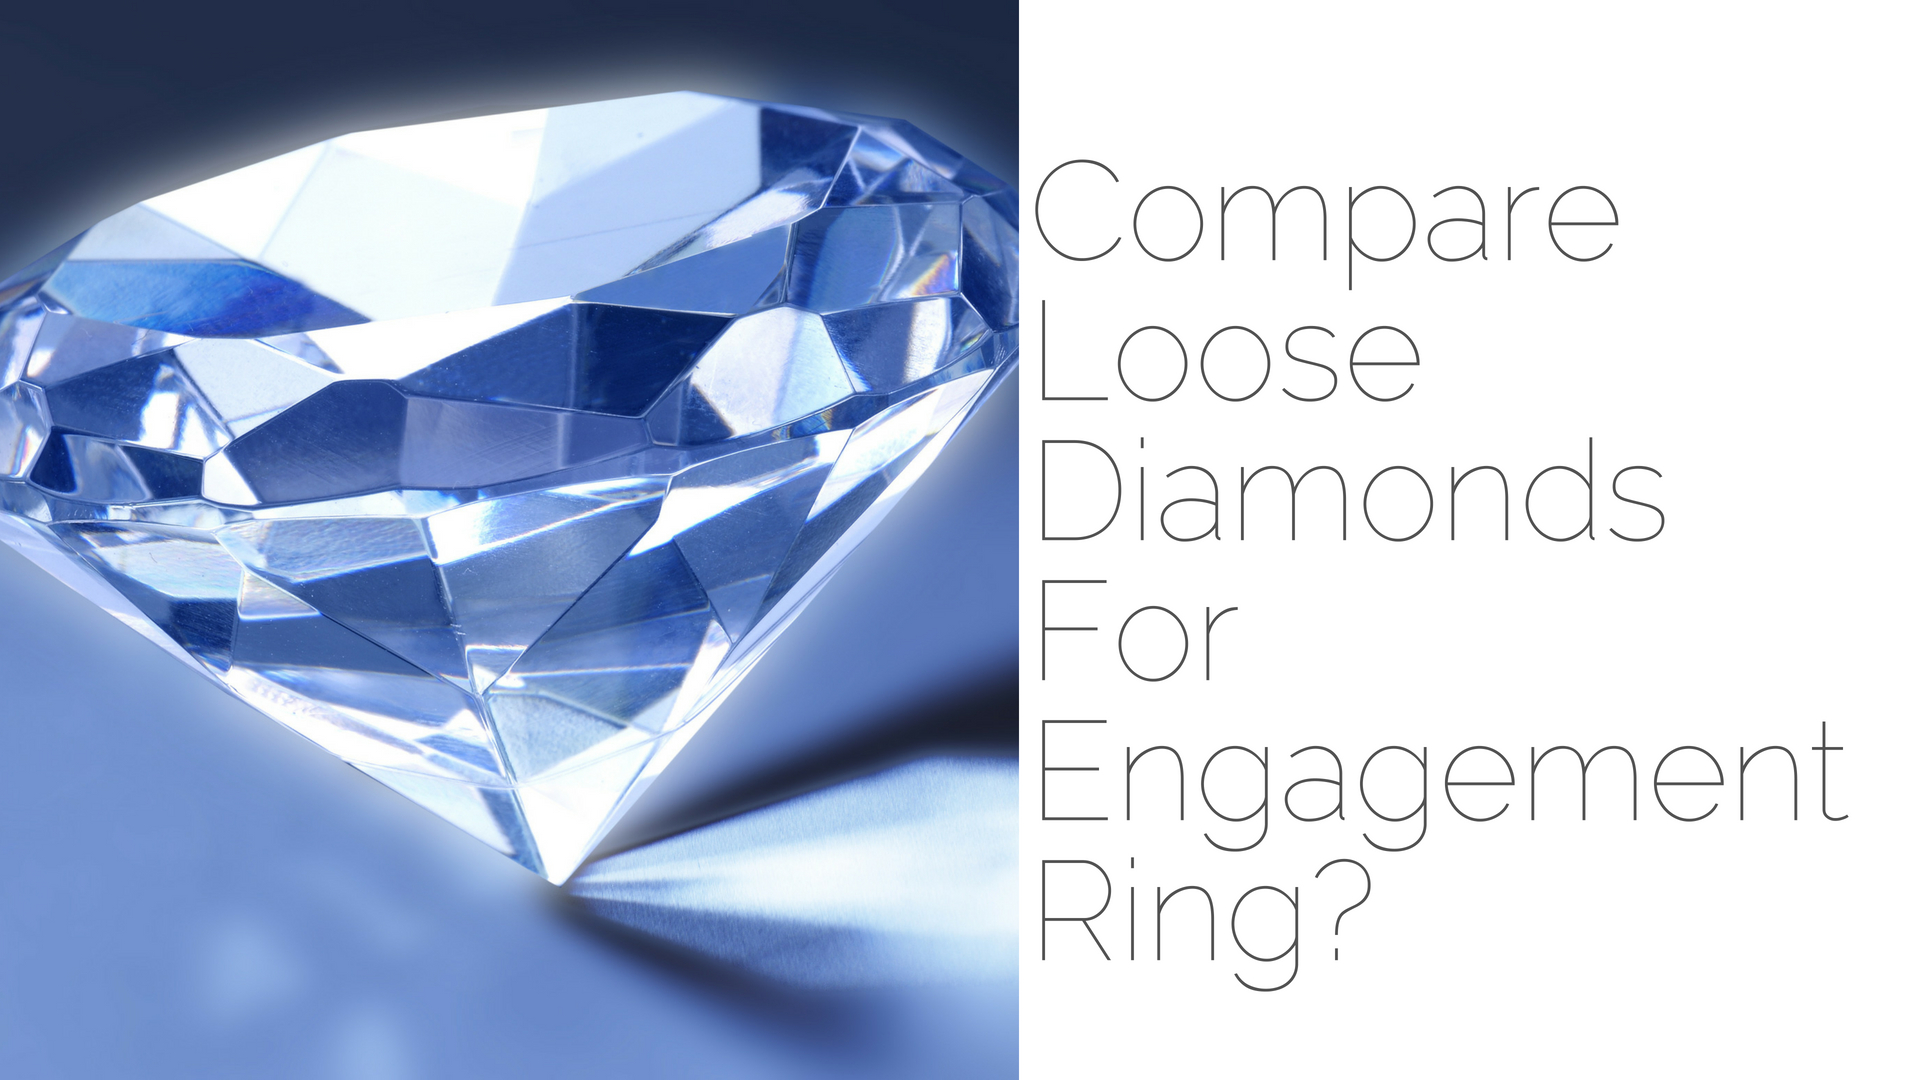 How To Compare Loose Diamonds For Engagement Ring